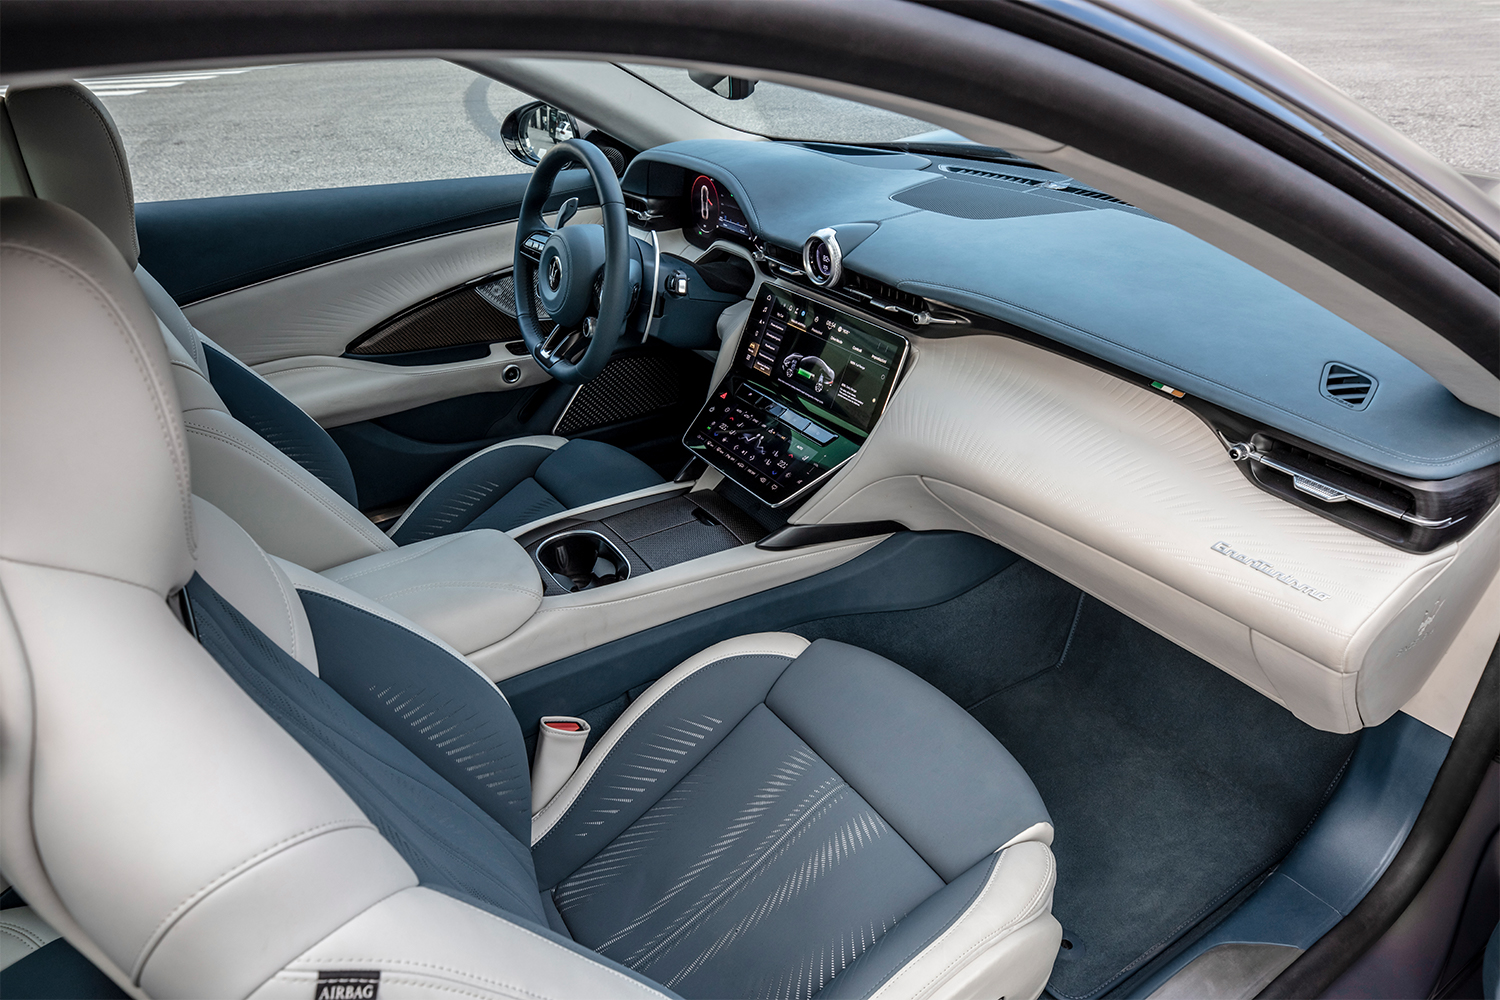 The interior of the new electric Maserati, which we reviewed